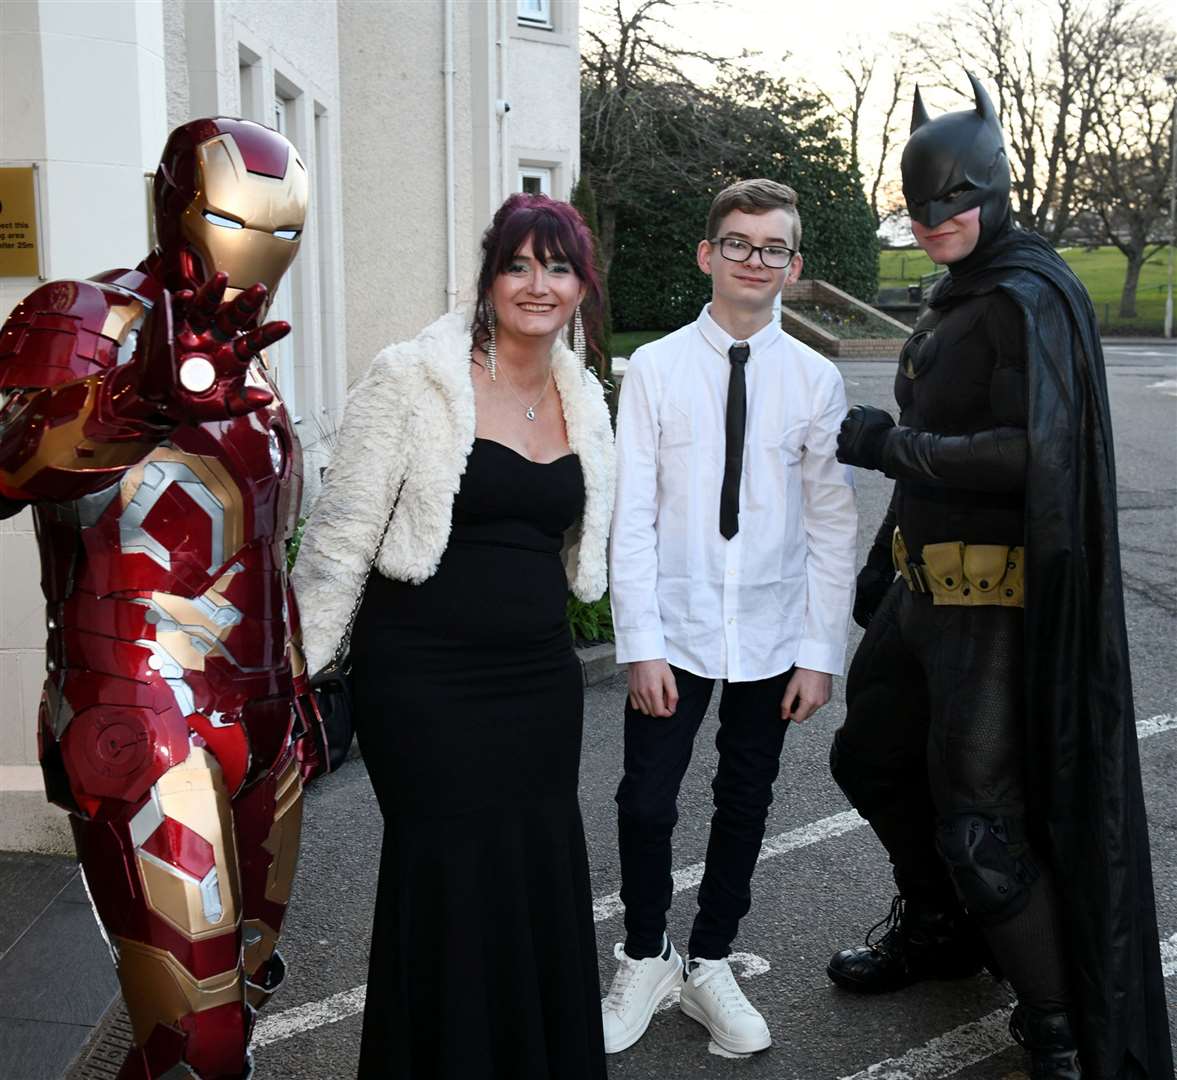 Ironman and Batman were on hand to greet arriving guests. Picture: James Mackenzie